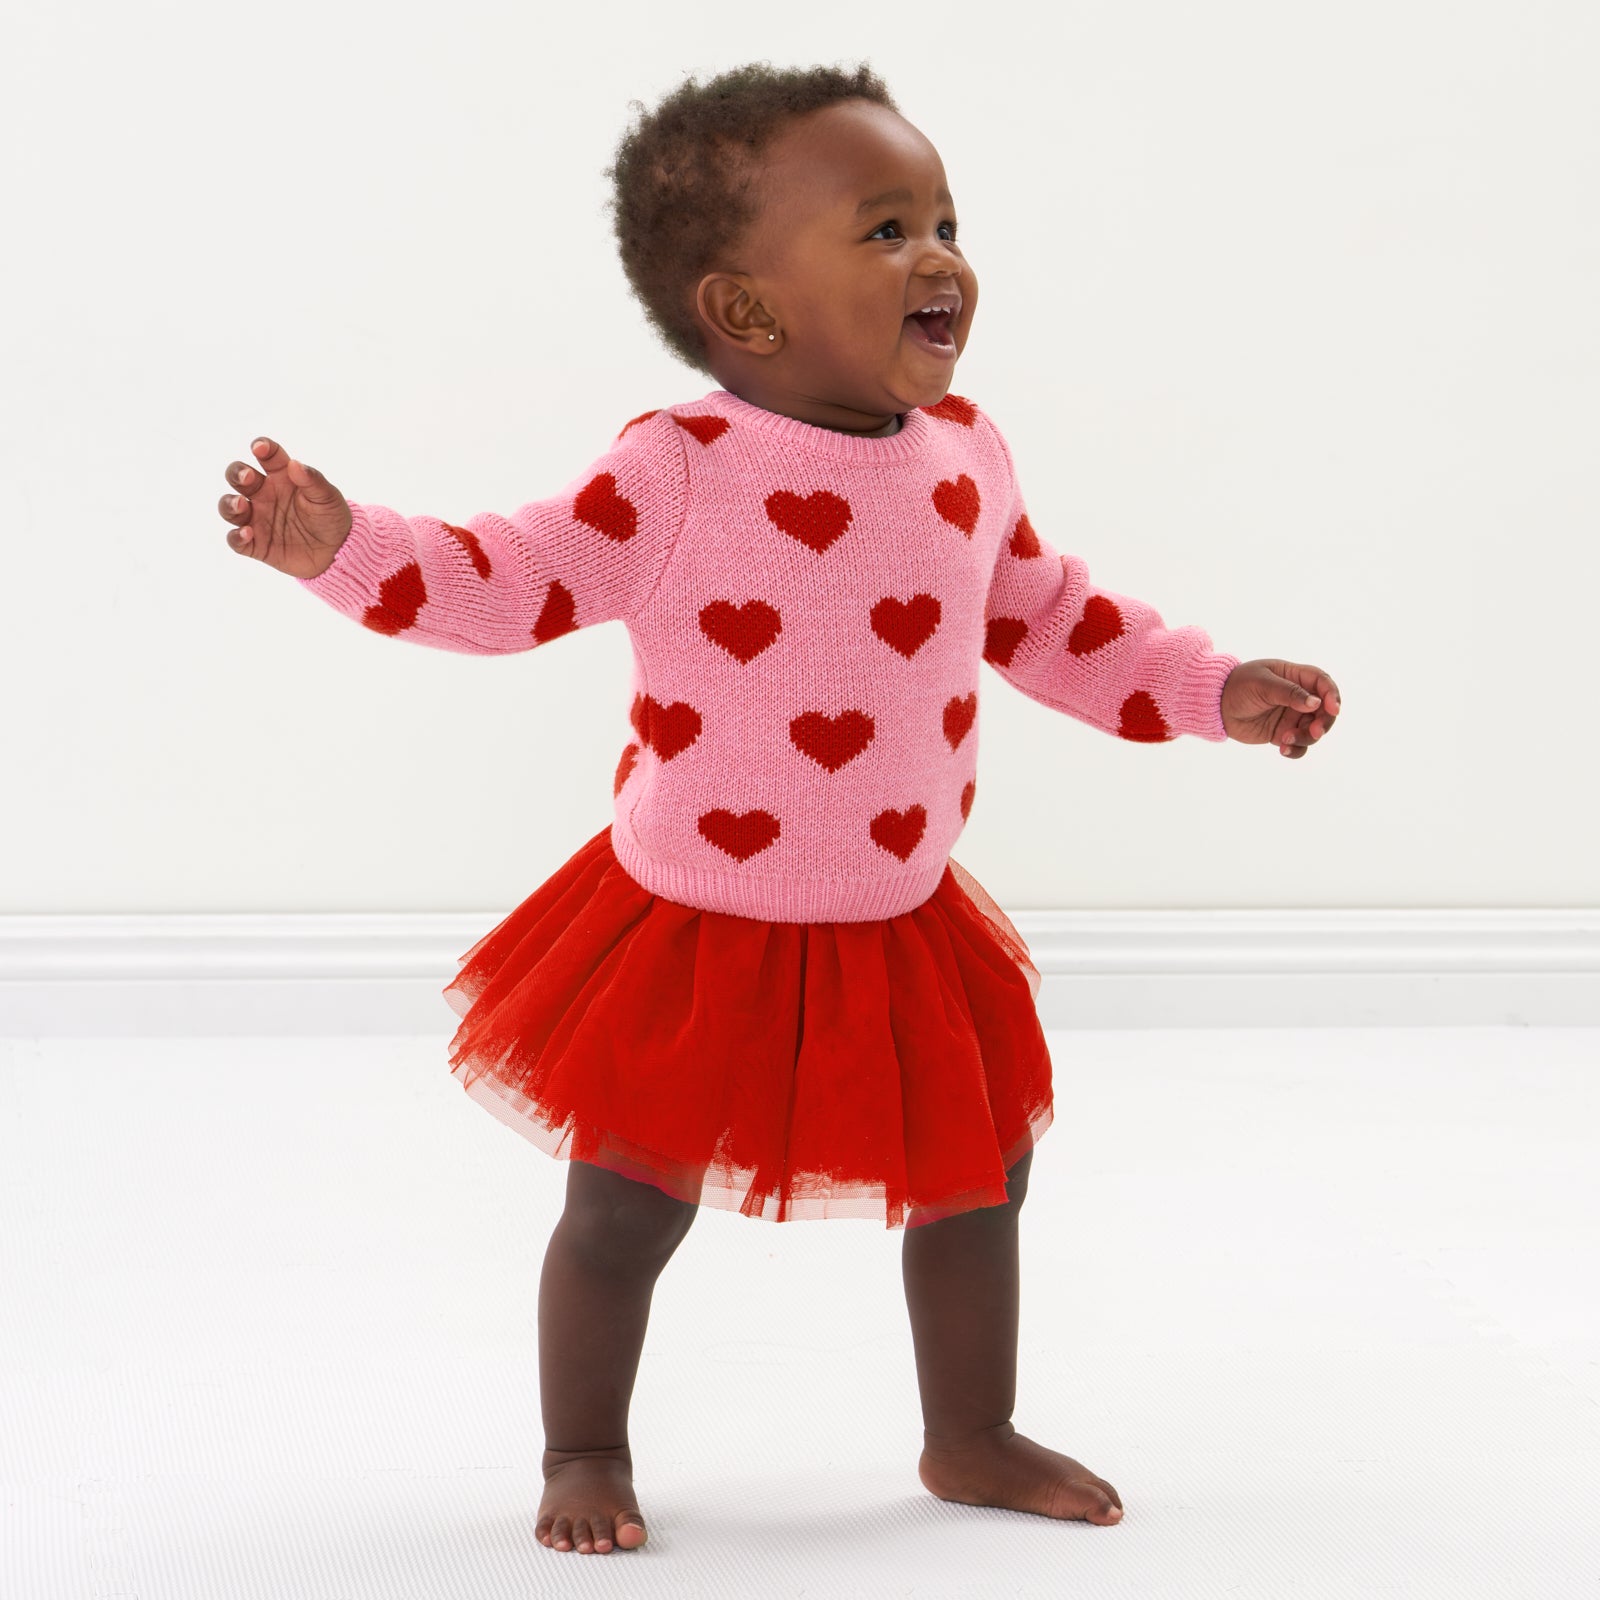 Child wearing a Hearts knit sweater and coordinating tutu skirt